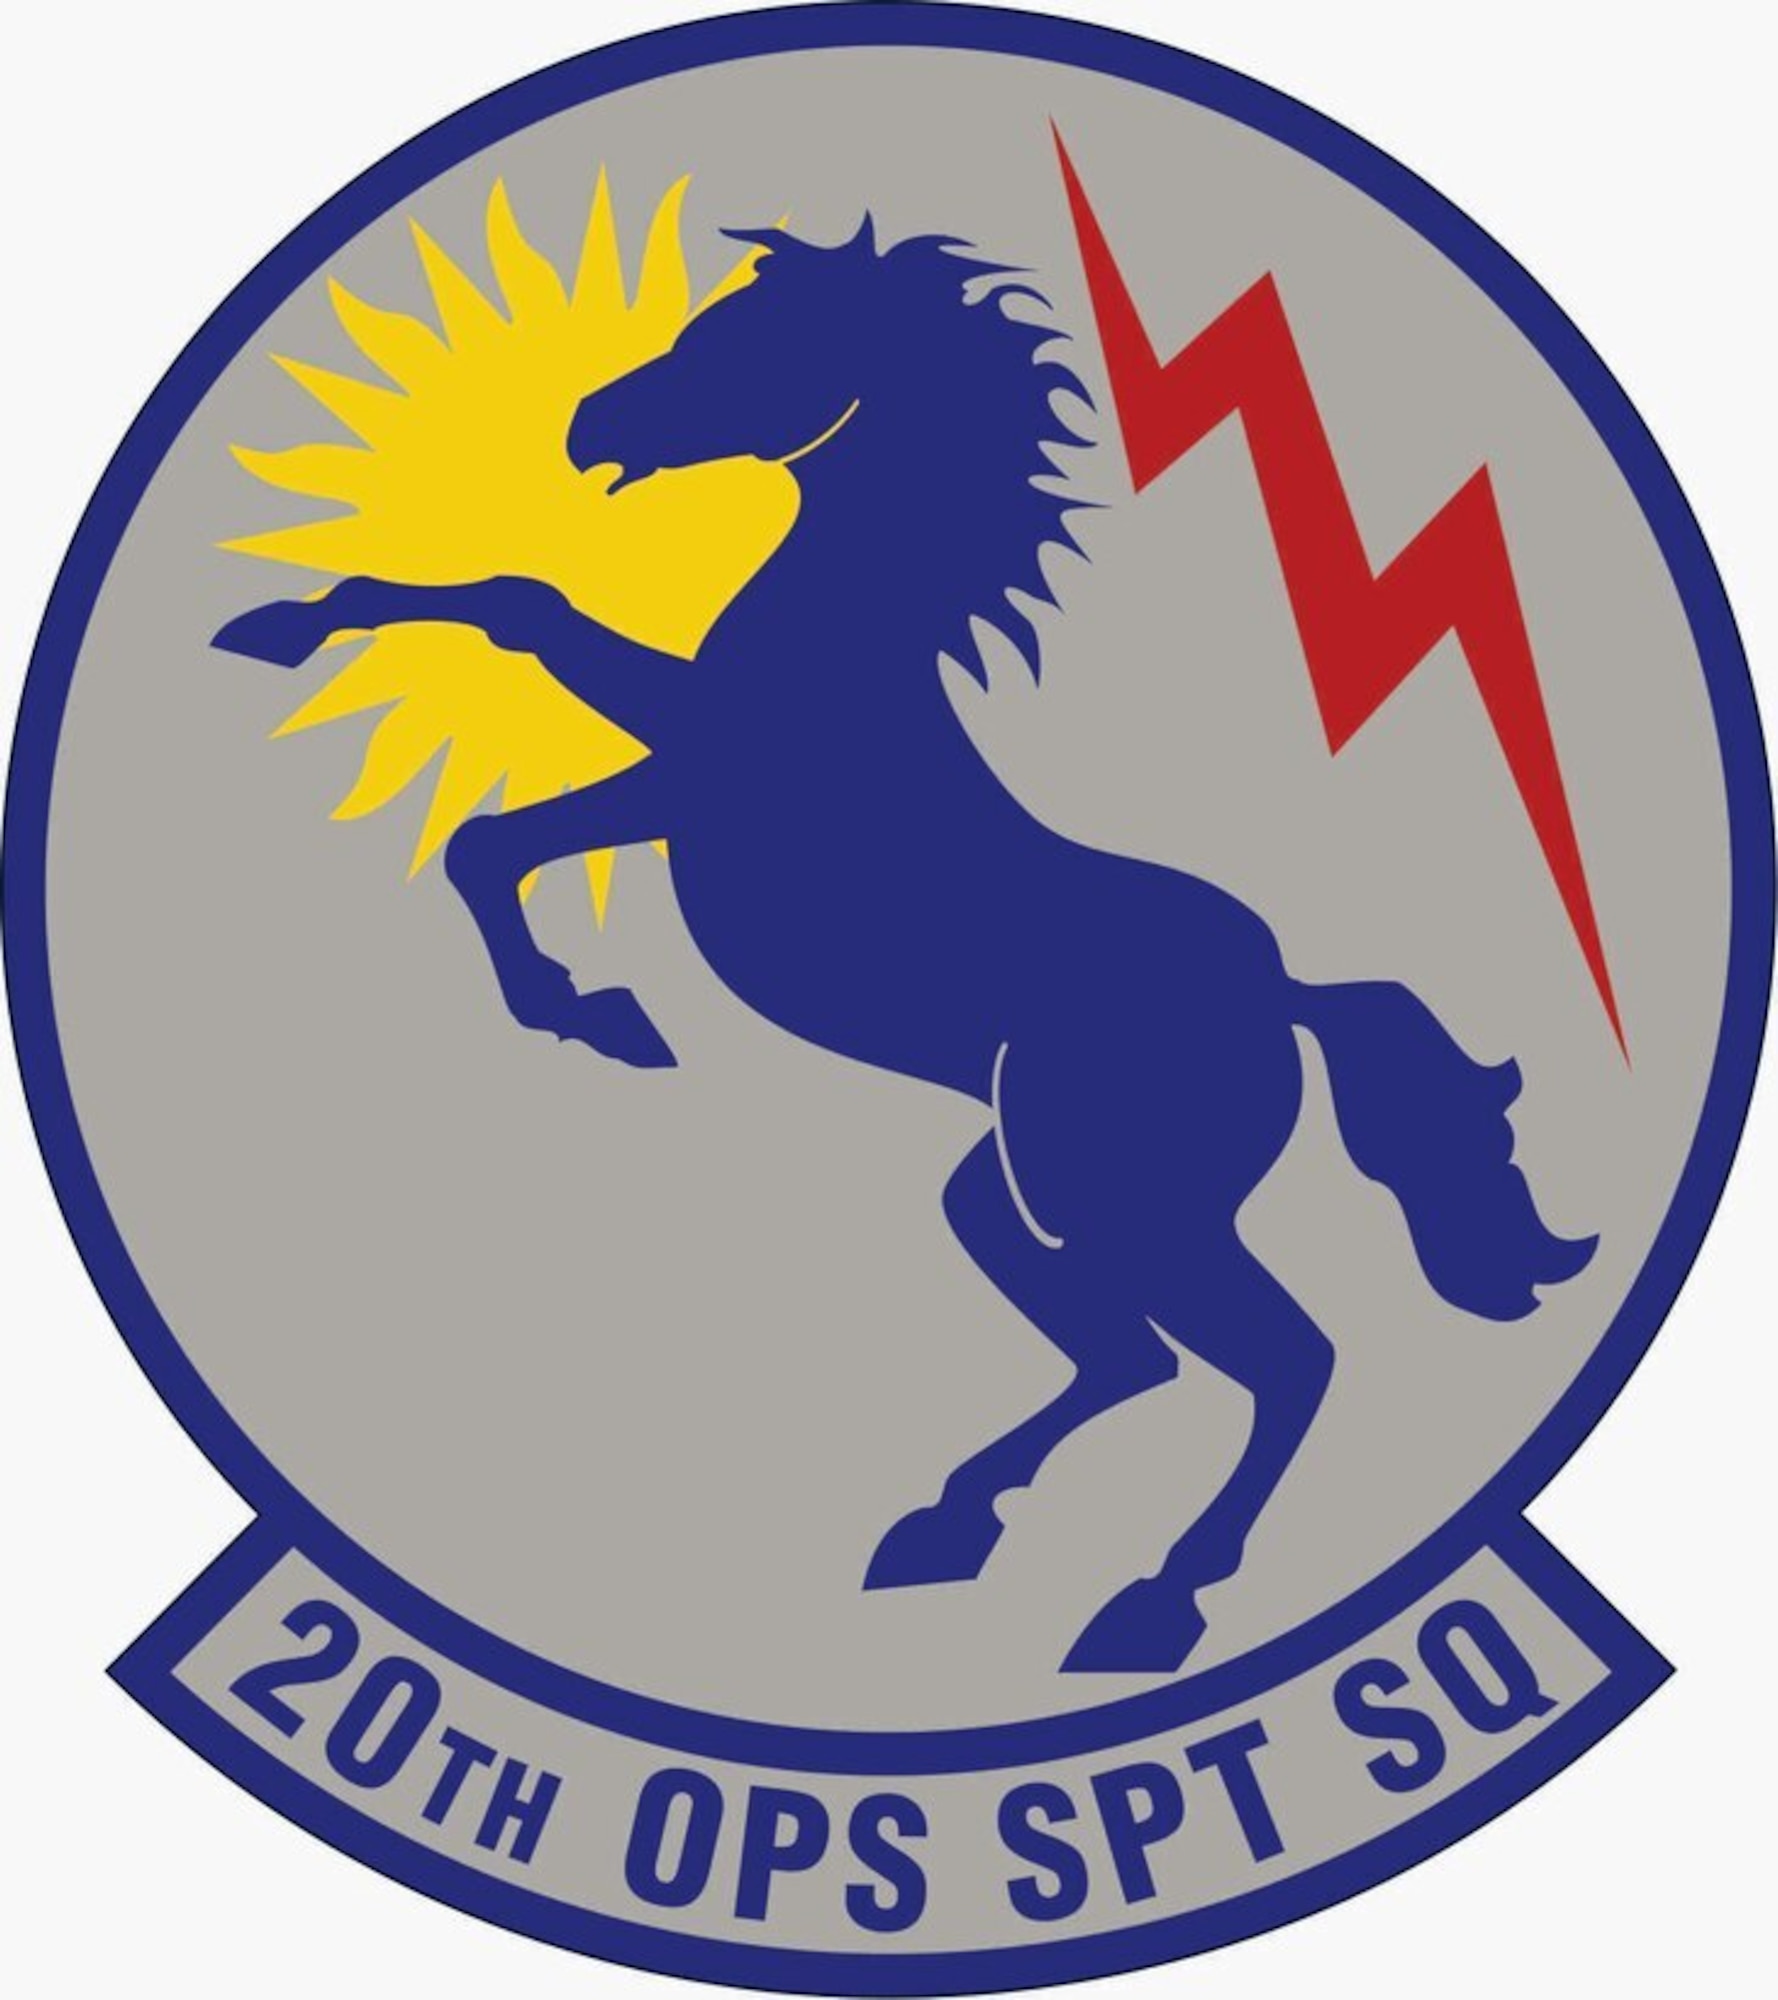 Graphic emblem of the 20th Operations Support Squadron